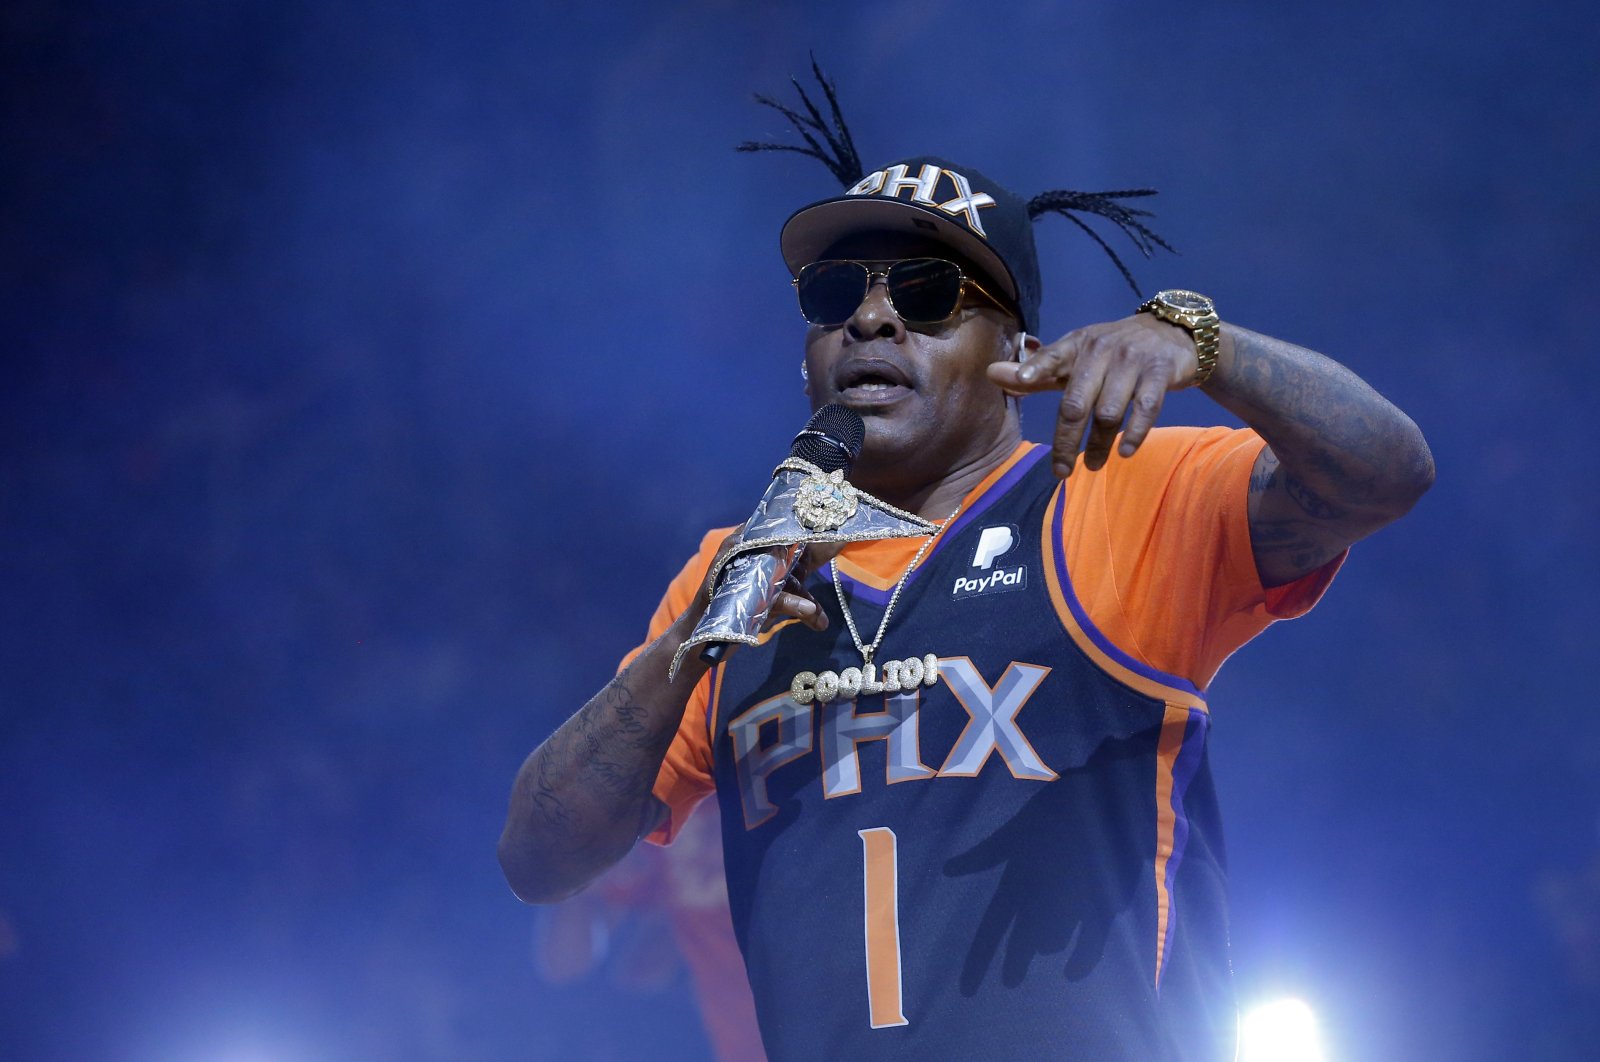 Coolio performs during halftime of an NBA basketball game between the Phoenix Suns and the New Orleans Pelicans, Phoenix, Arizona, U.S., April 5, 2019. (AP Photo)